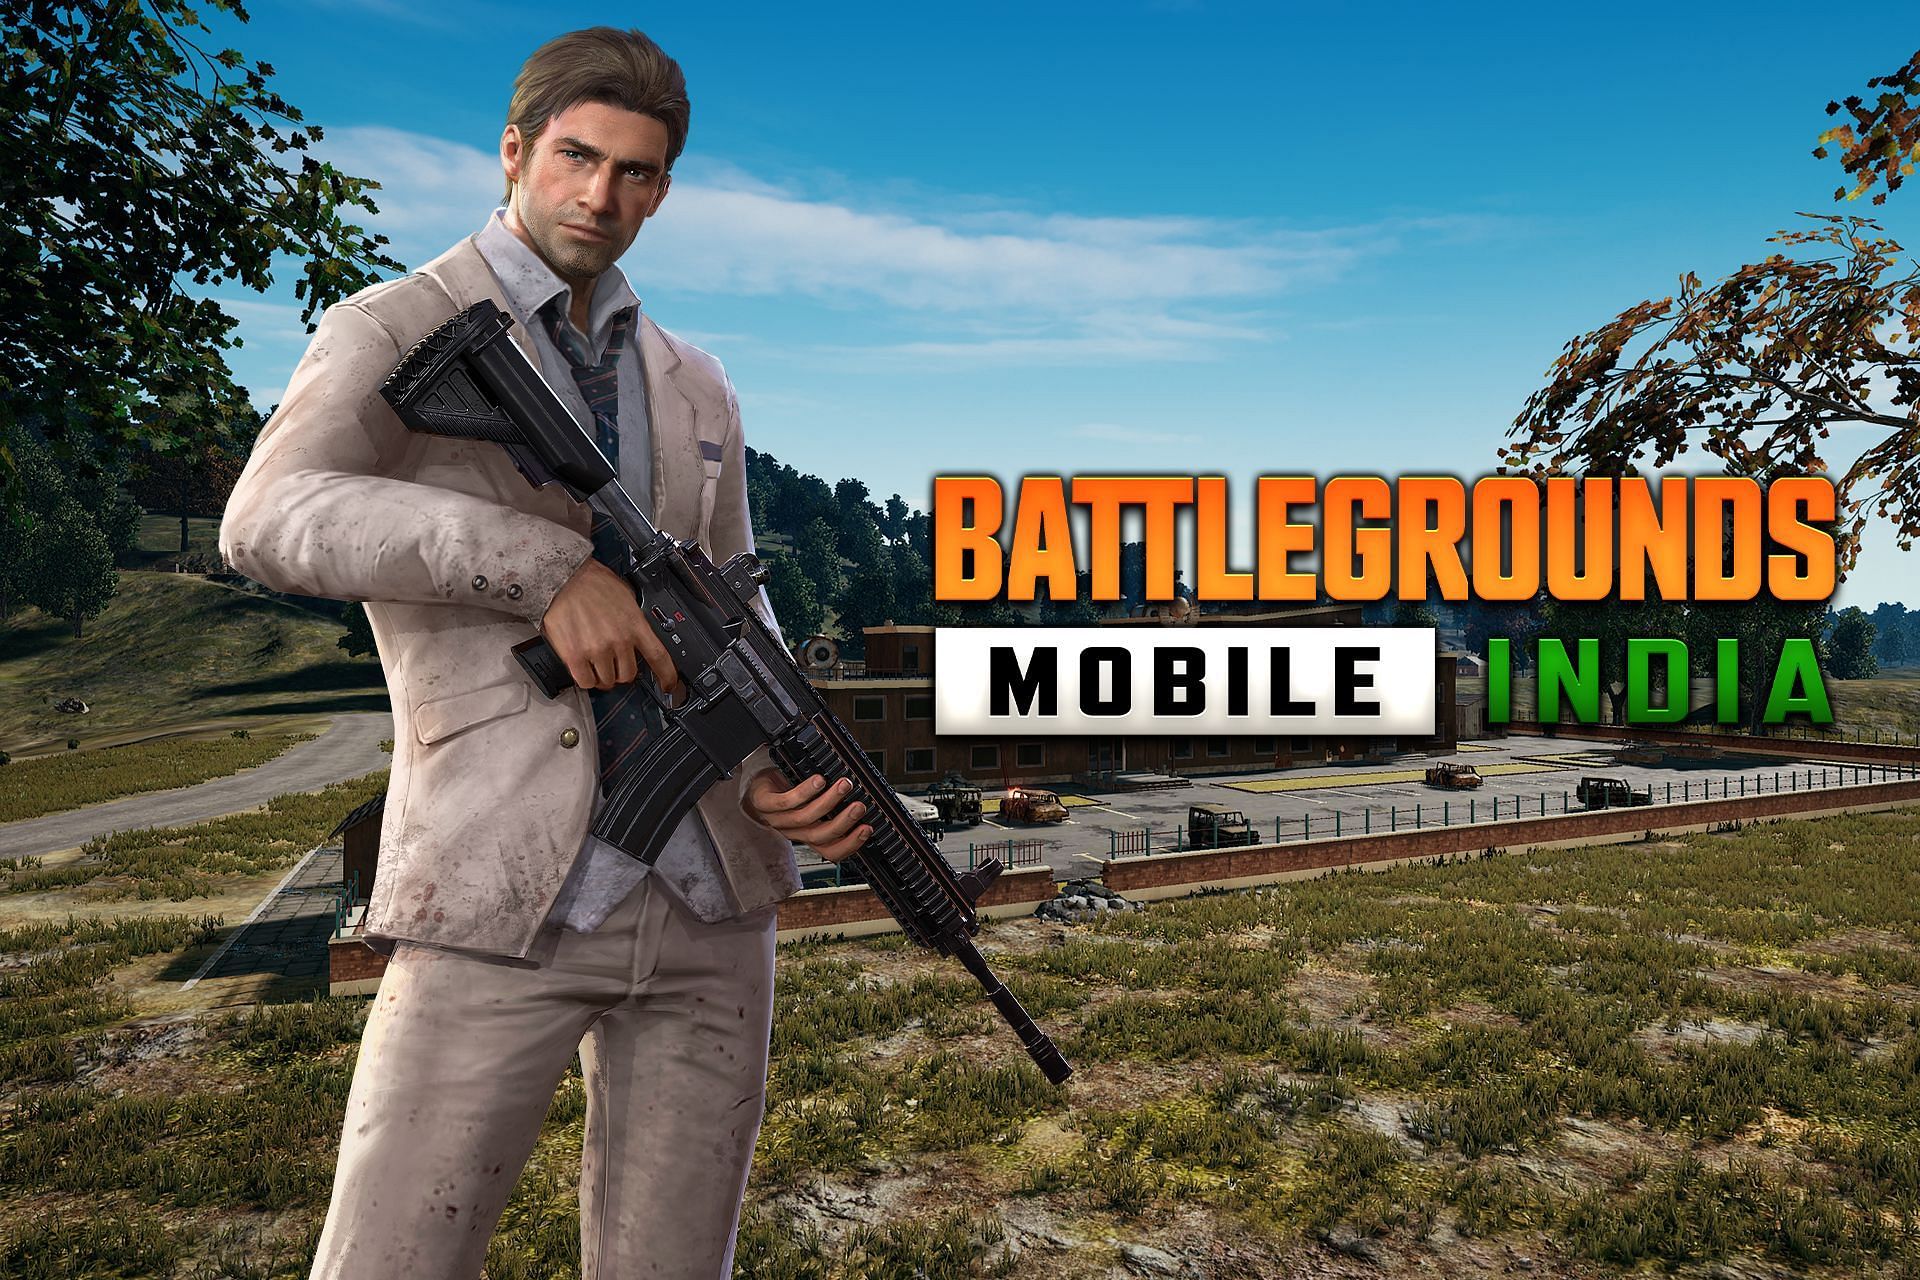 Battlegrounds Mobile India has been blocked for more than five months now (Image via Sportskeeda)